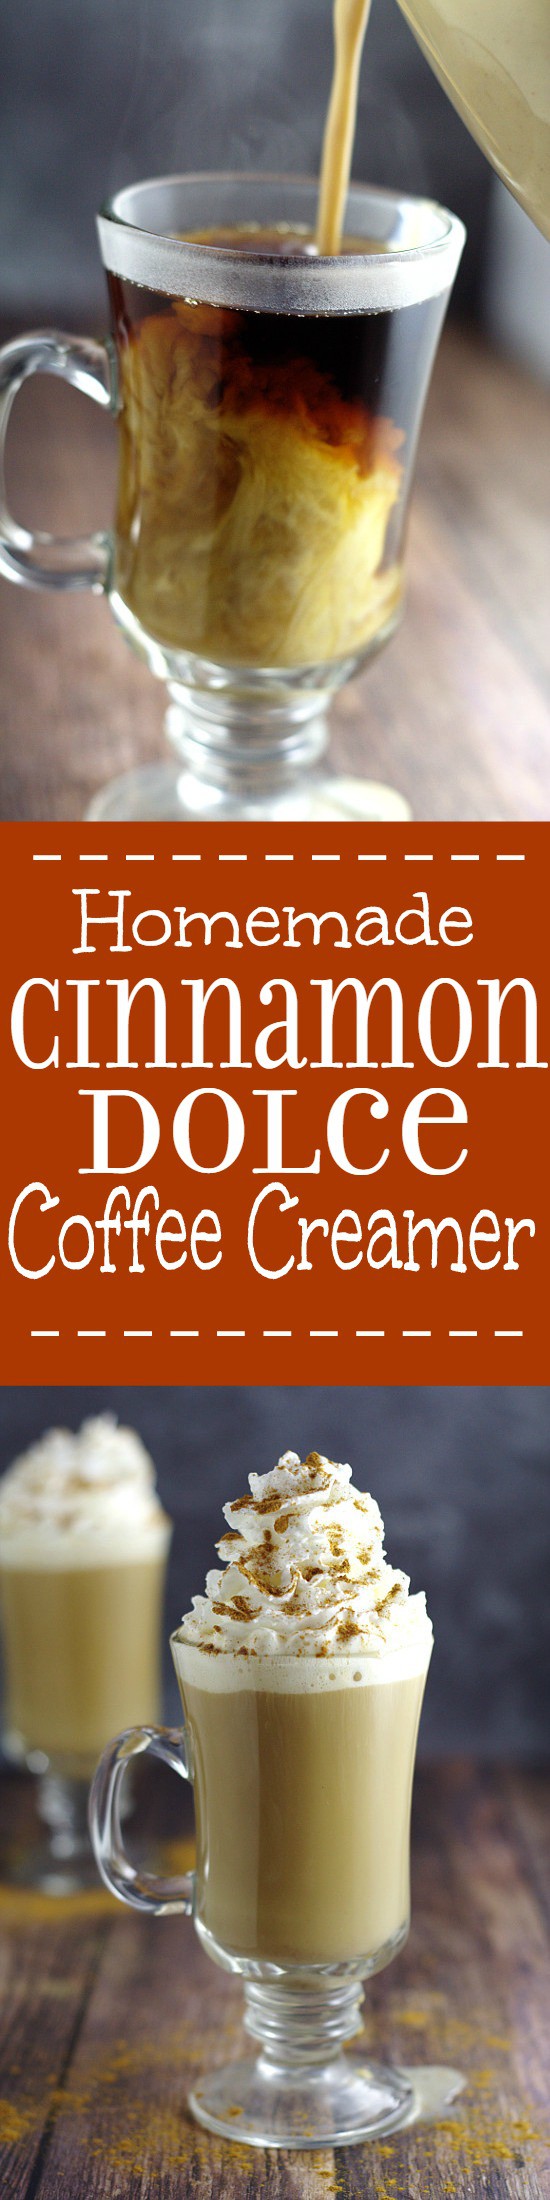 Homemade Cinnamon Dolce Coffee Creamer recipe is a sinful and decadent combination of caramel, cream, and cinnamon, making your coffee amazing! Perfect! Cinnamon dolce is my absolute favorite latte at Starbucks!